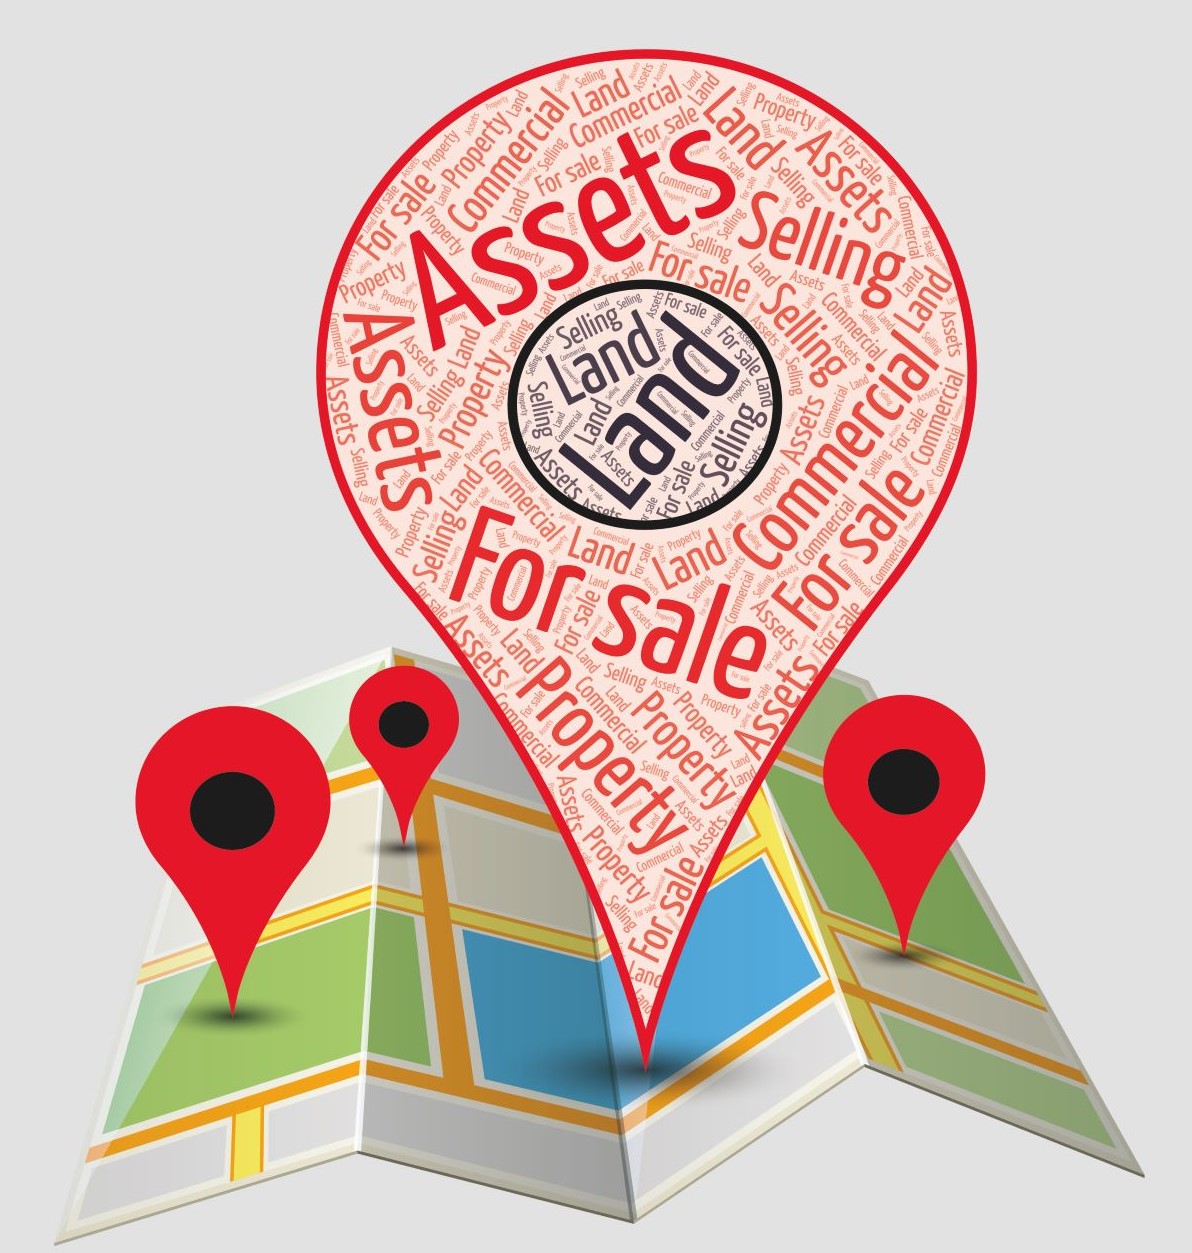 Image of a map pin as part of the assets disposal campaign